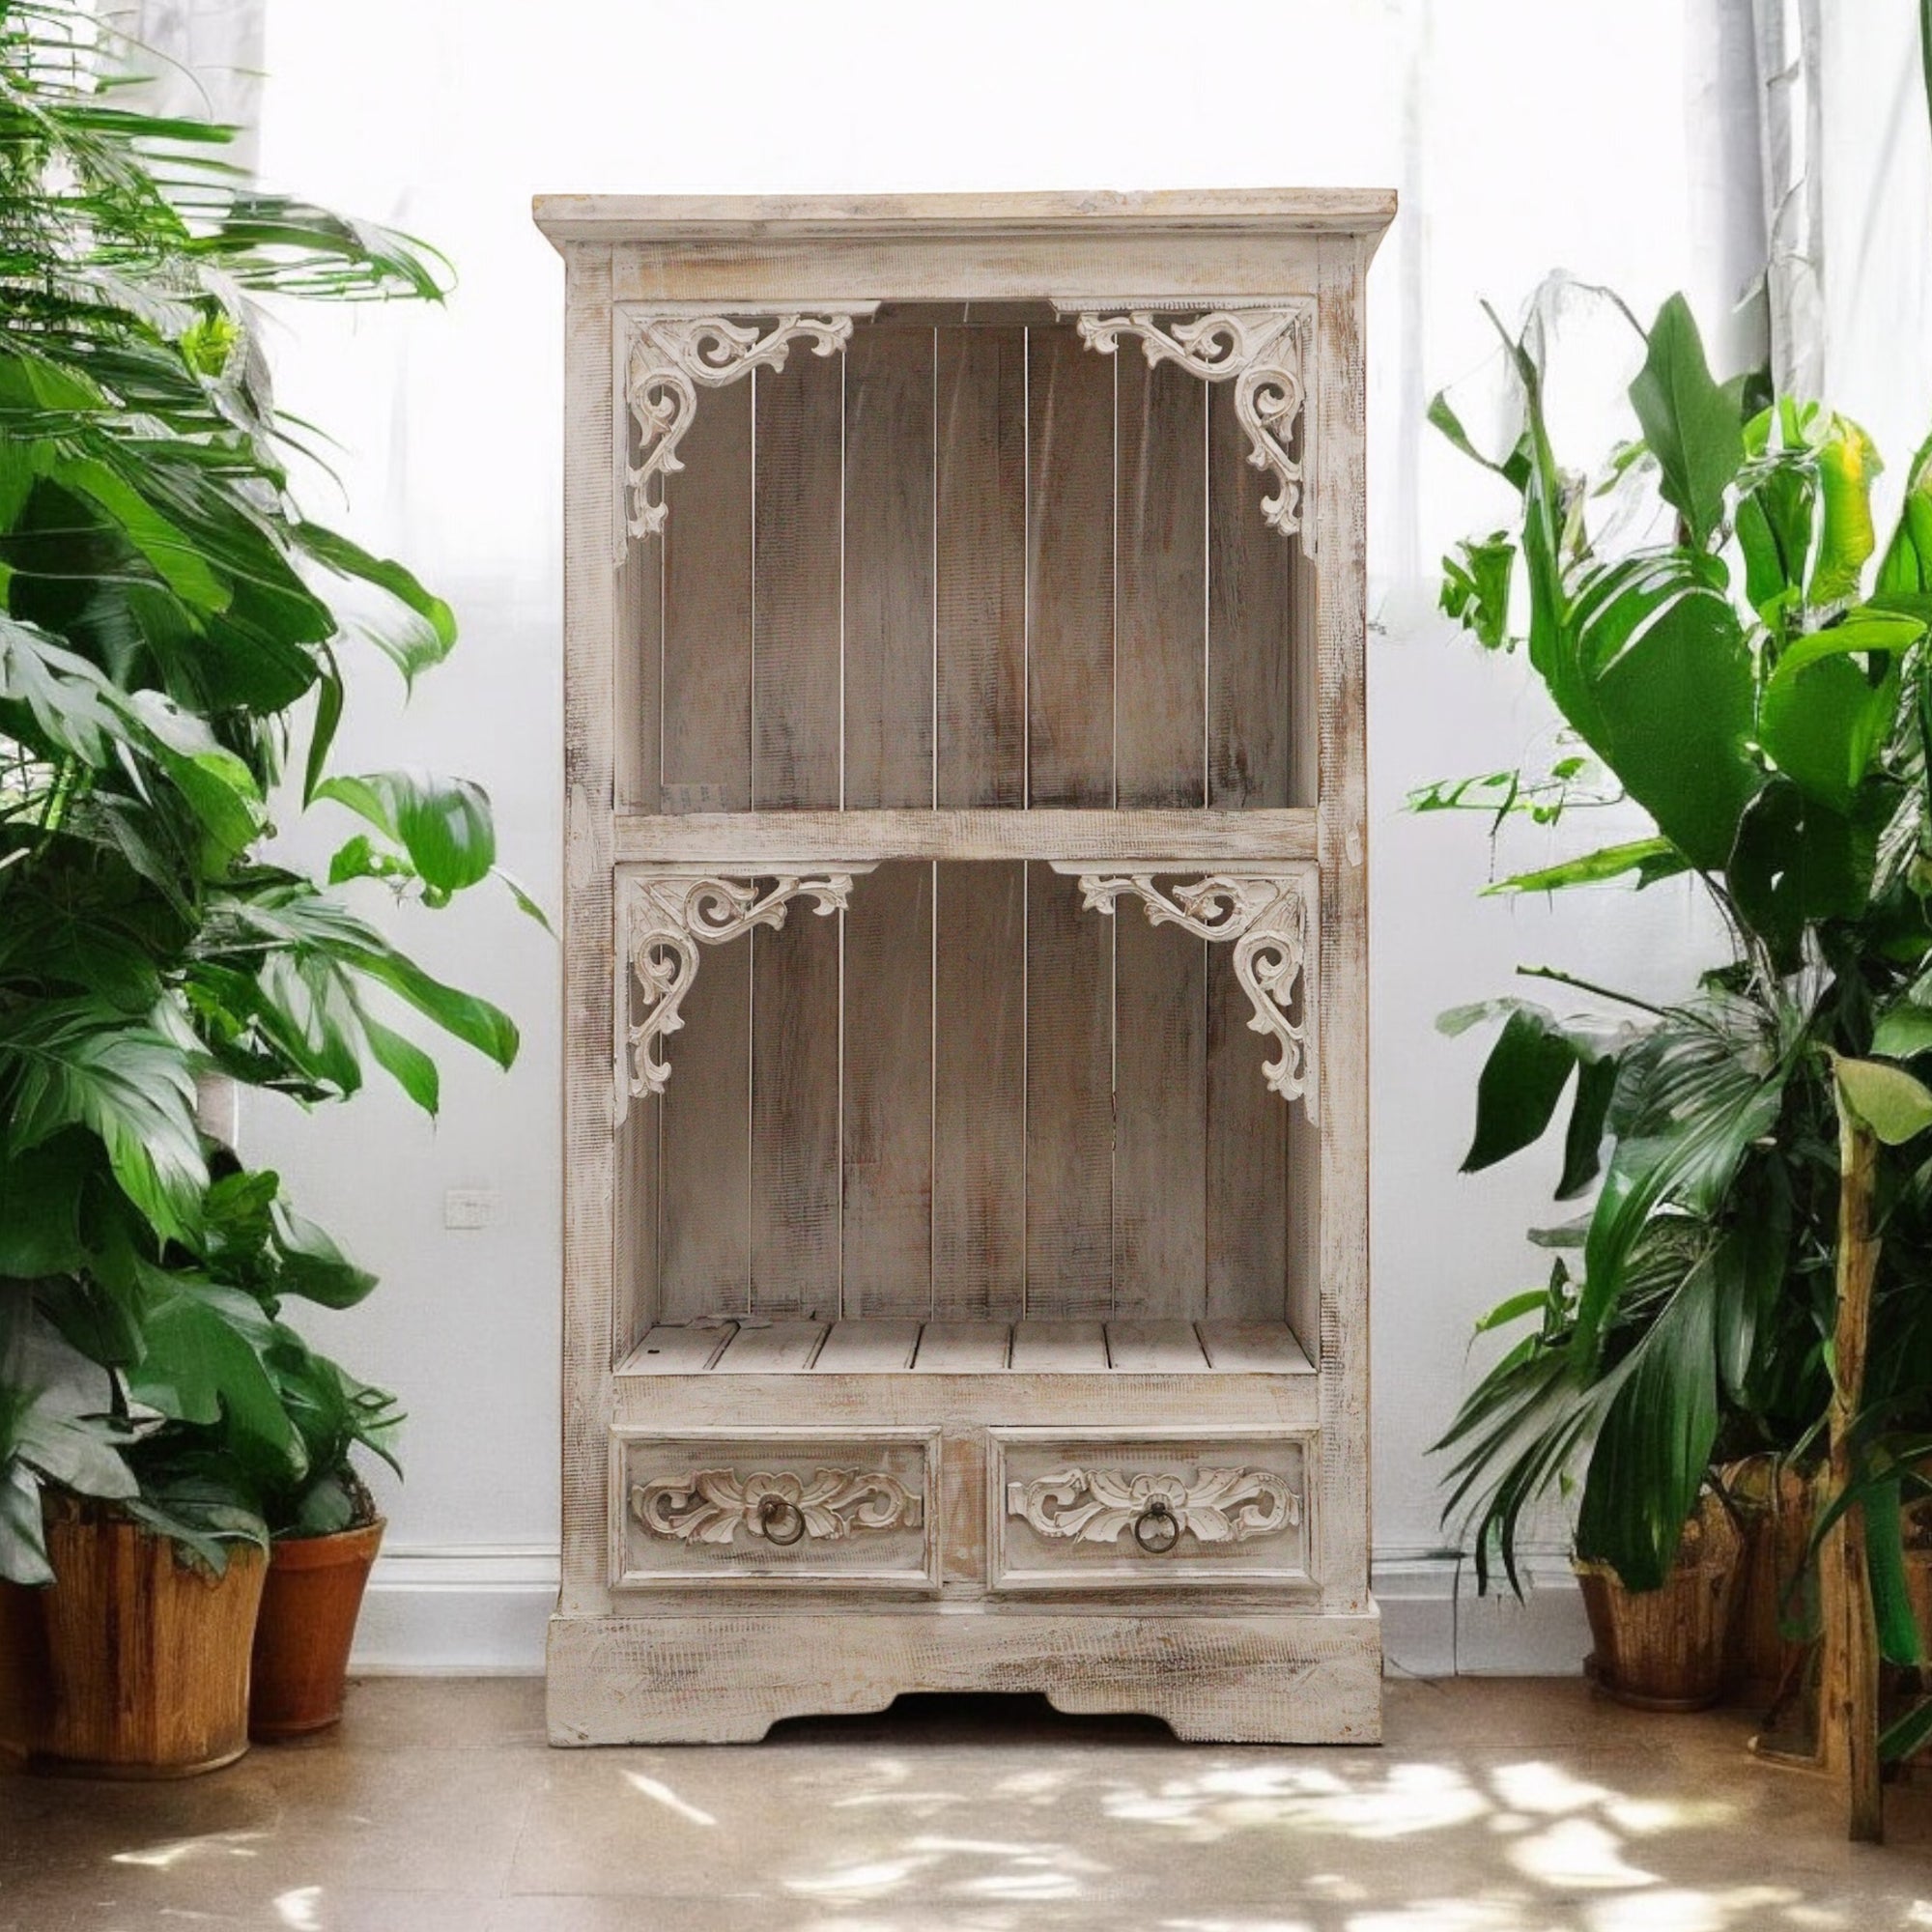 Shabby Chic Bathroom Cabinet - Wooden Storage Cabinet with Drawers - Rustic Display Shelf